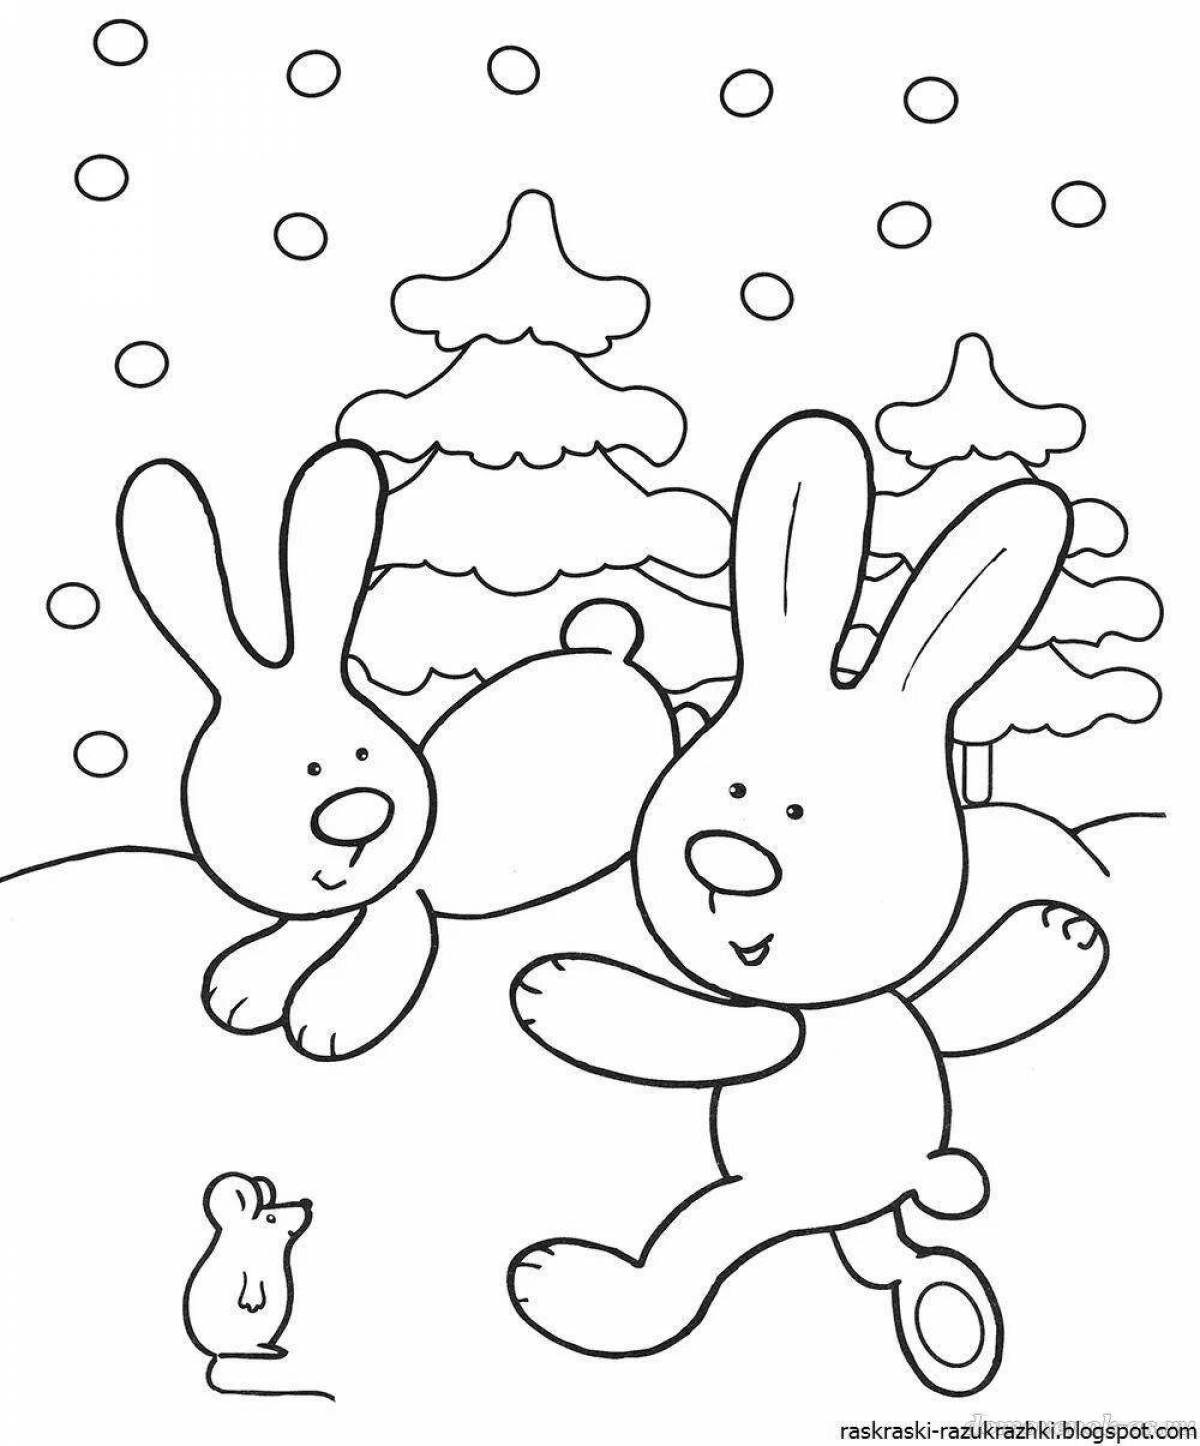 Fascinating rabbit coloring book for kids 2-3 years old